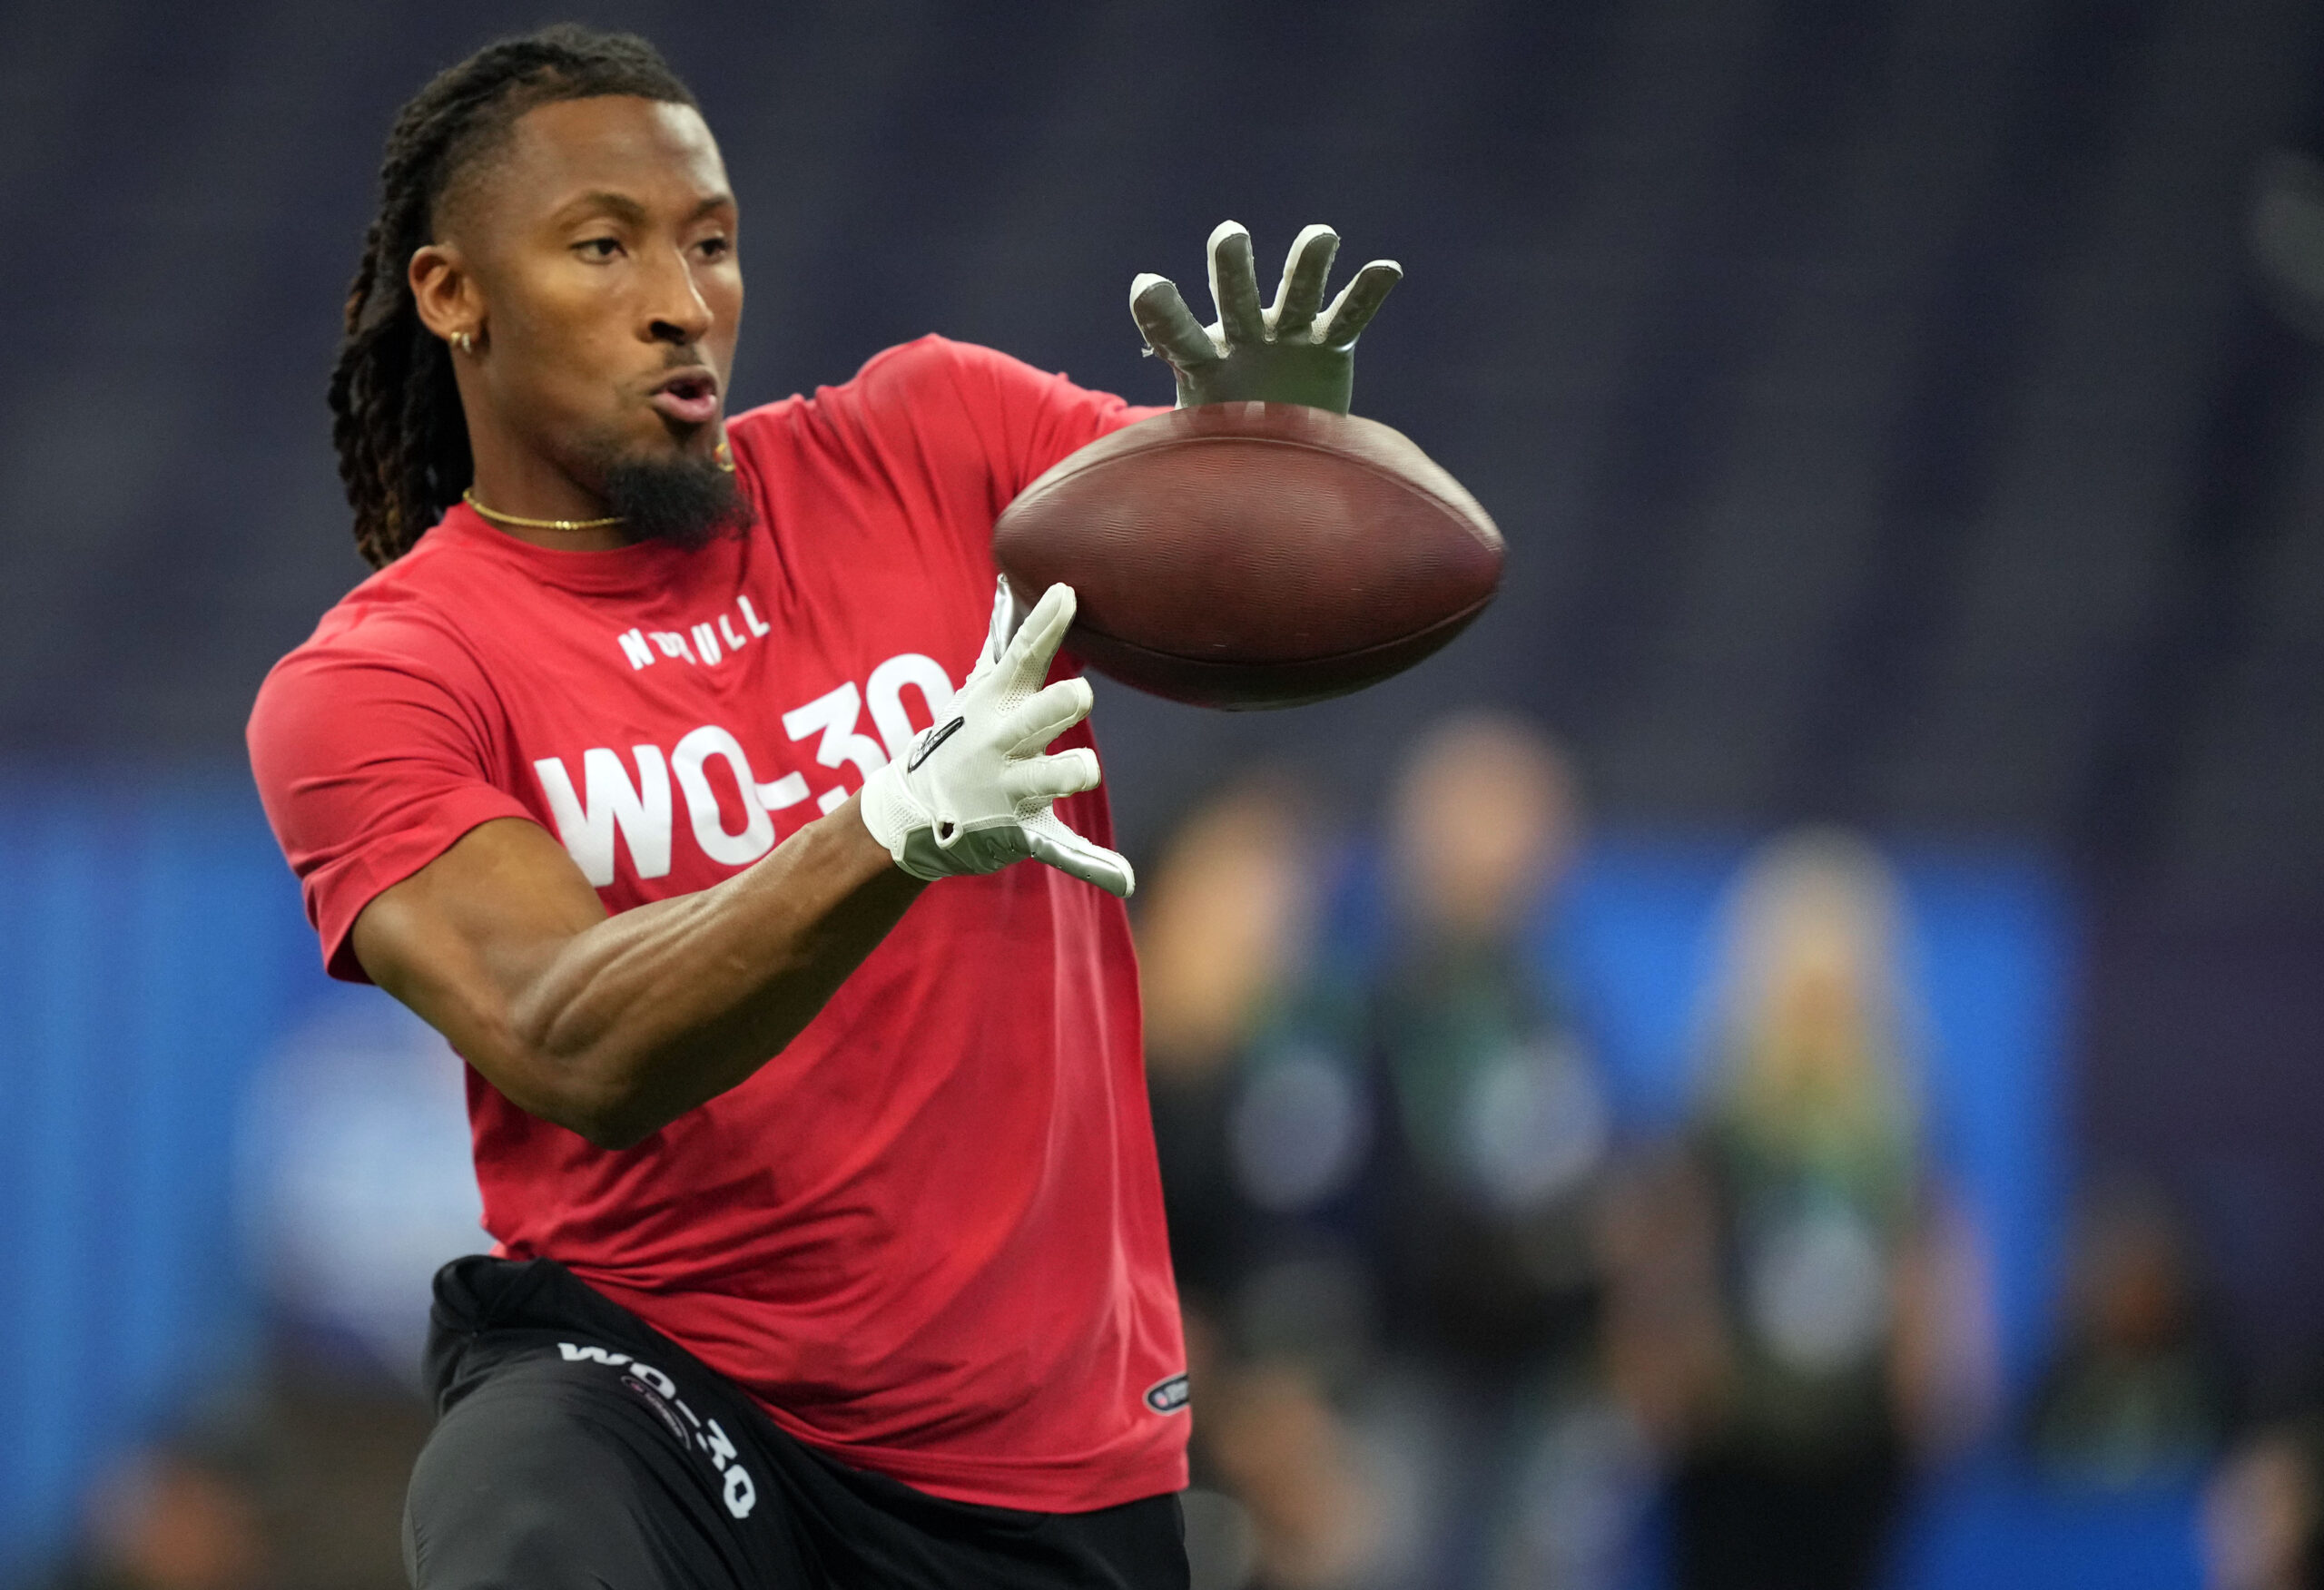 VIDEO: Best wide receiver workouts at 2023 NFL scouting combine